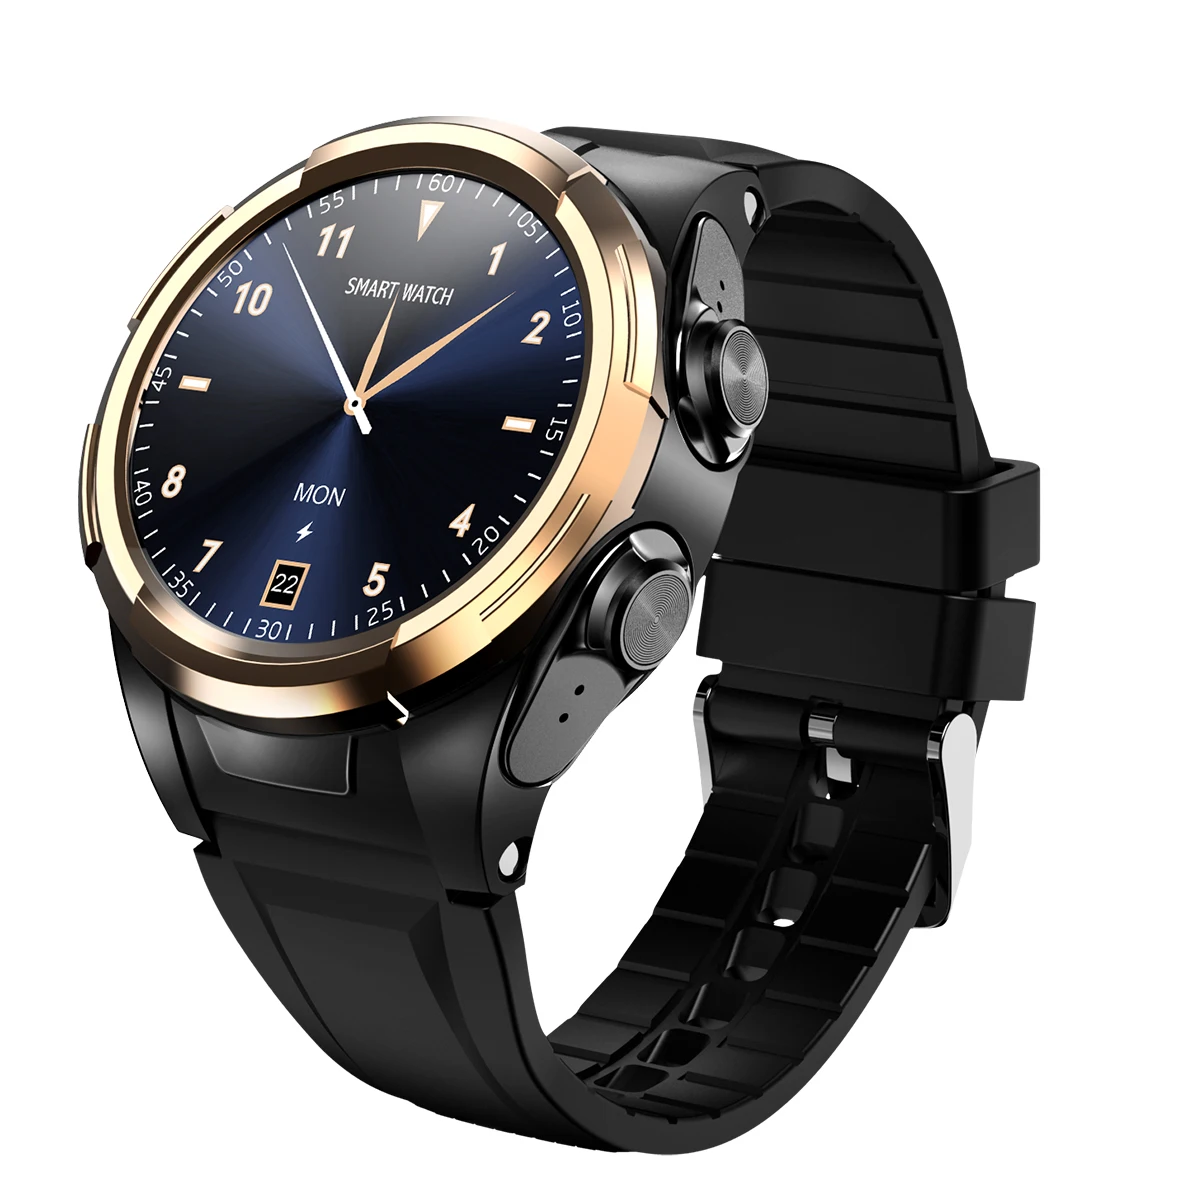 

2021 Hot Sell Mobile Phones Headset 2-in-1 Smart Watch Real-time Temperature Monitoring Blood Oxygen Health Smartwatch